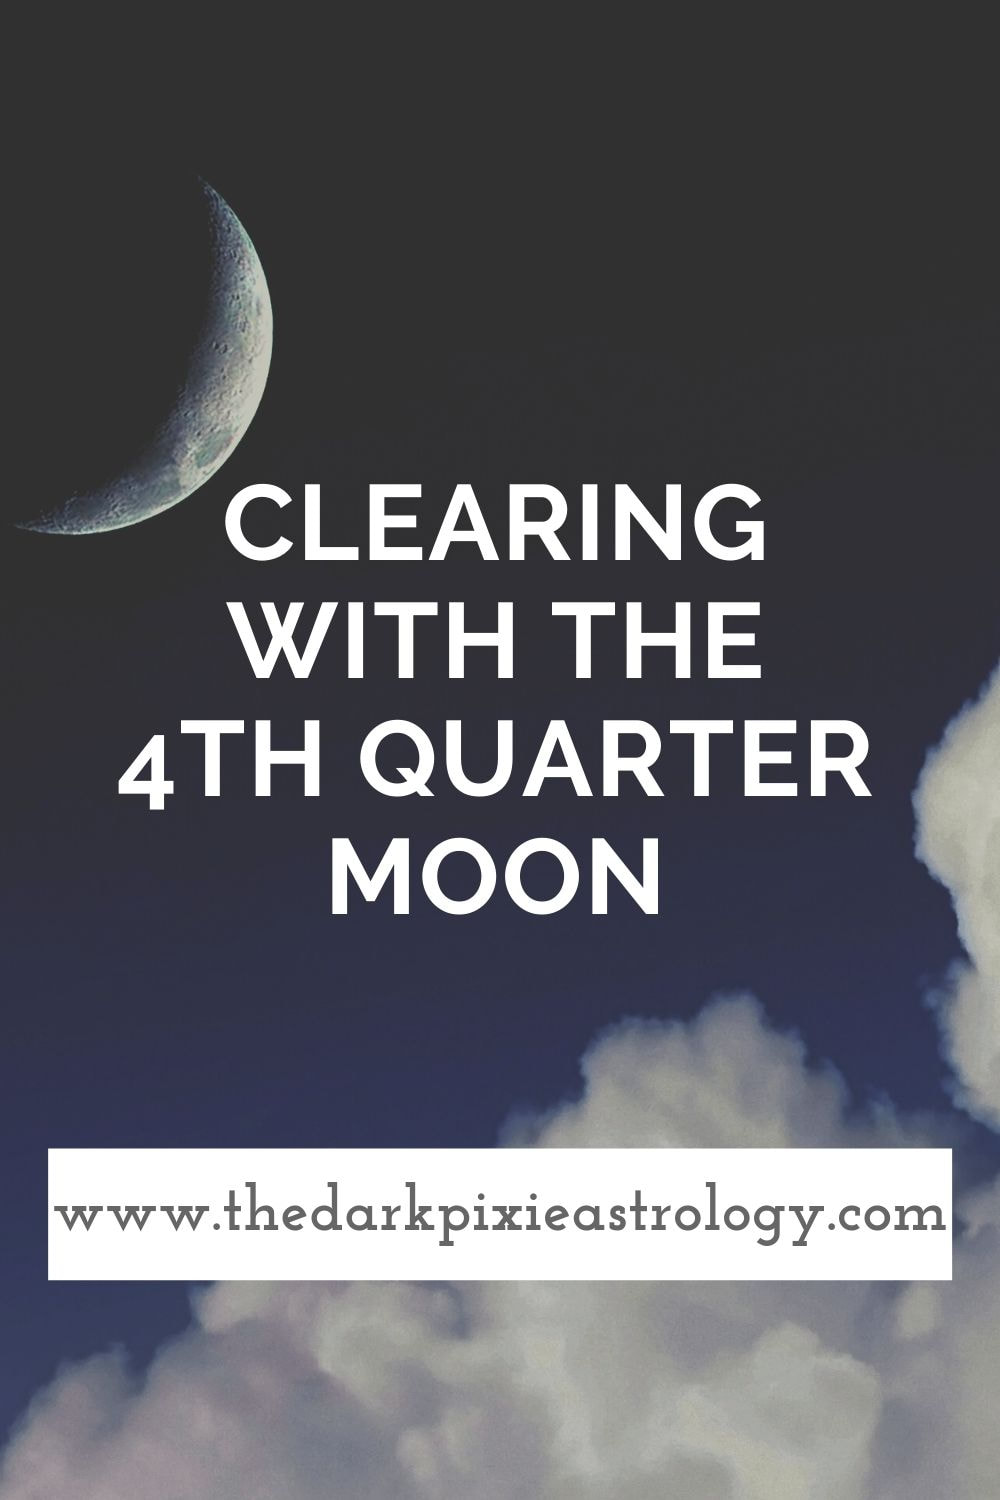 Clearing With the 4th Quarter Moon - The Dark Pixie Astrology